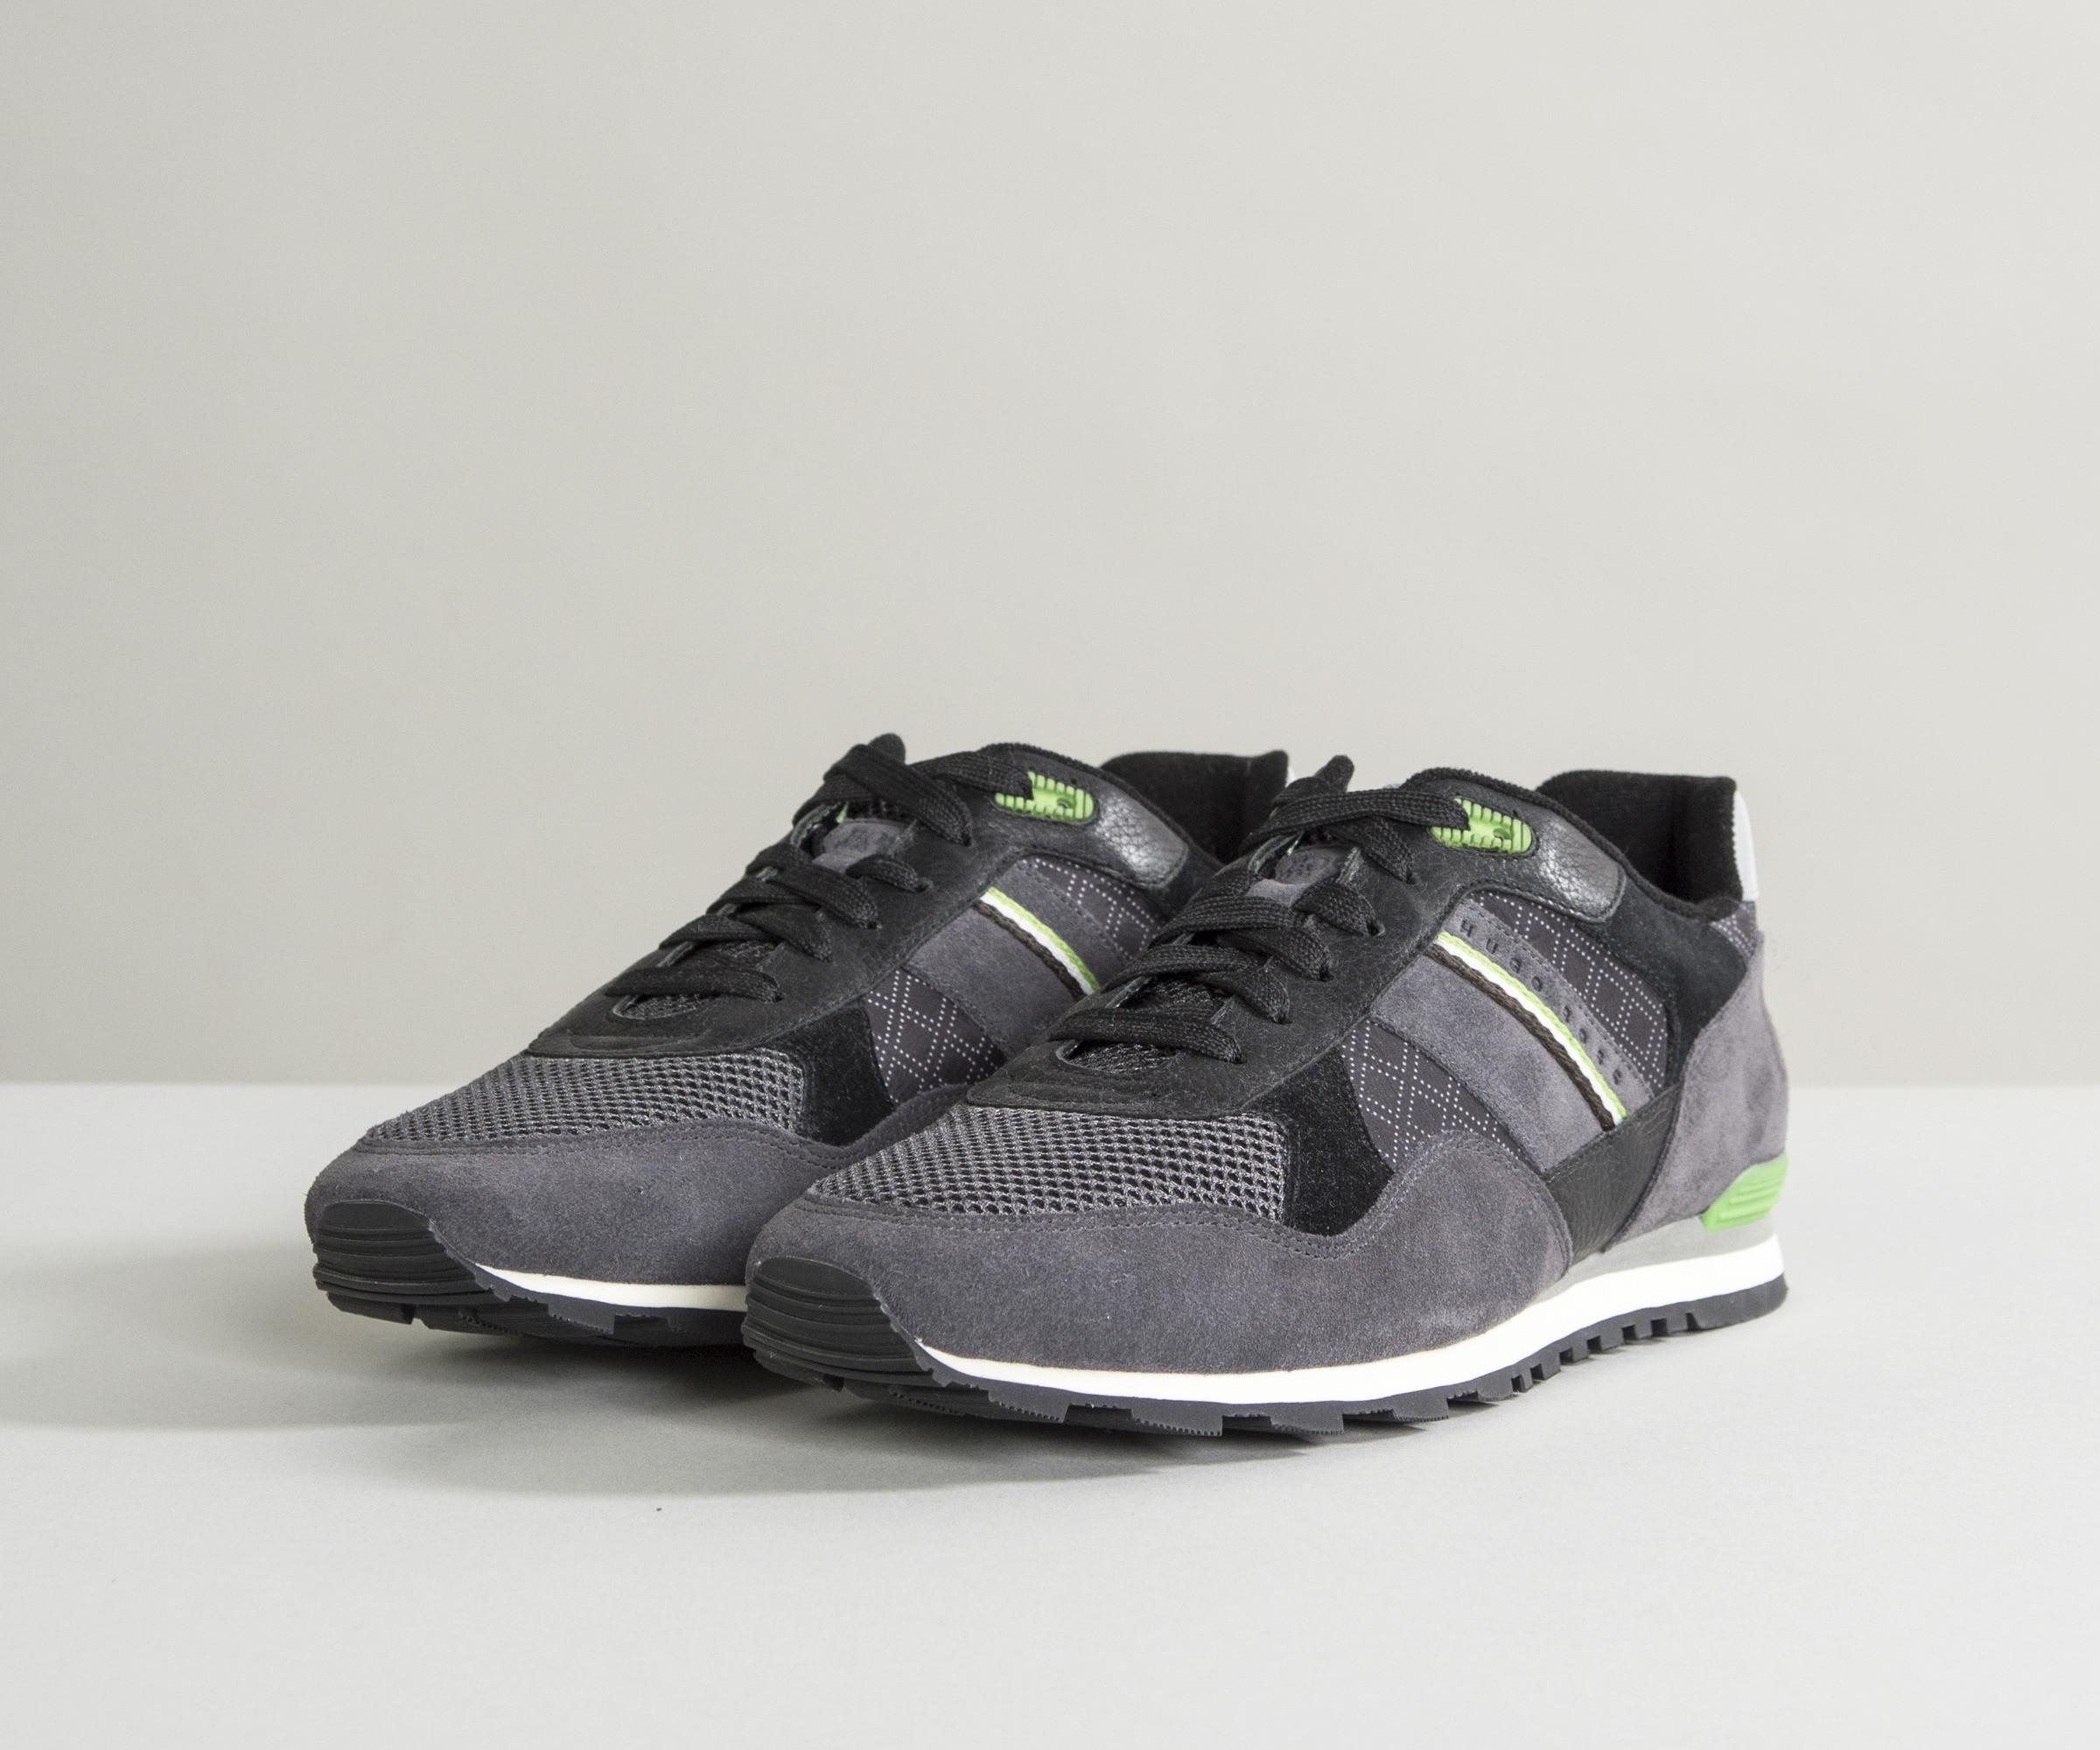 Hugo Boss Green Runcool 111 Trainer With Suede And Mesh Detail In Grey